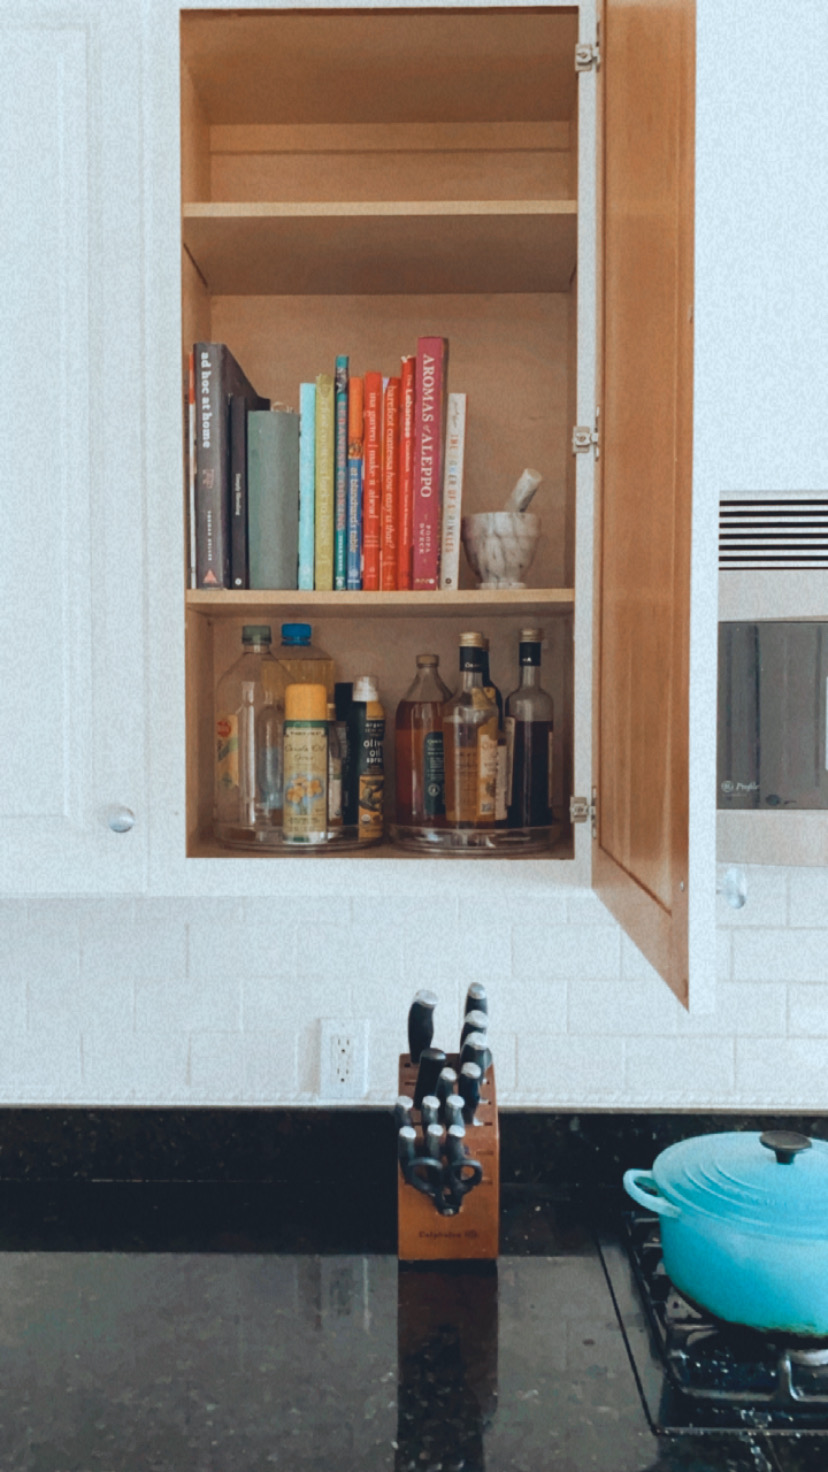 Home Organization ideas, cabinet organization , cleaning out you kitchen, wellness cabinet, healthy habits 